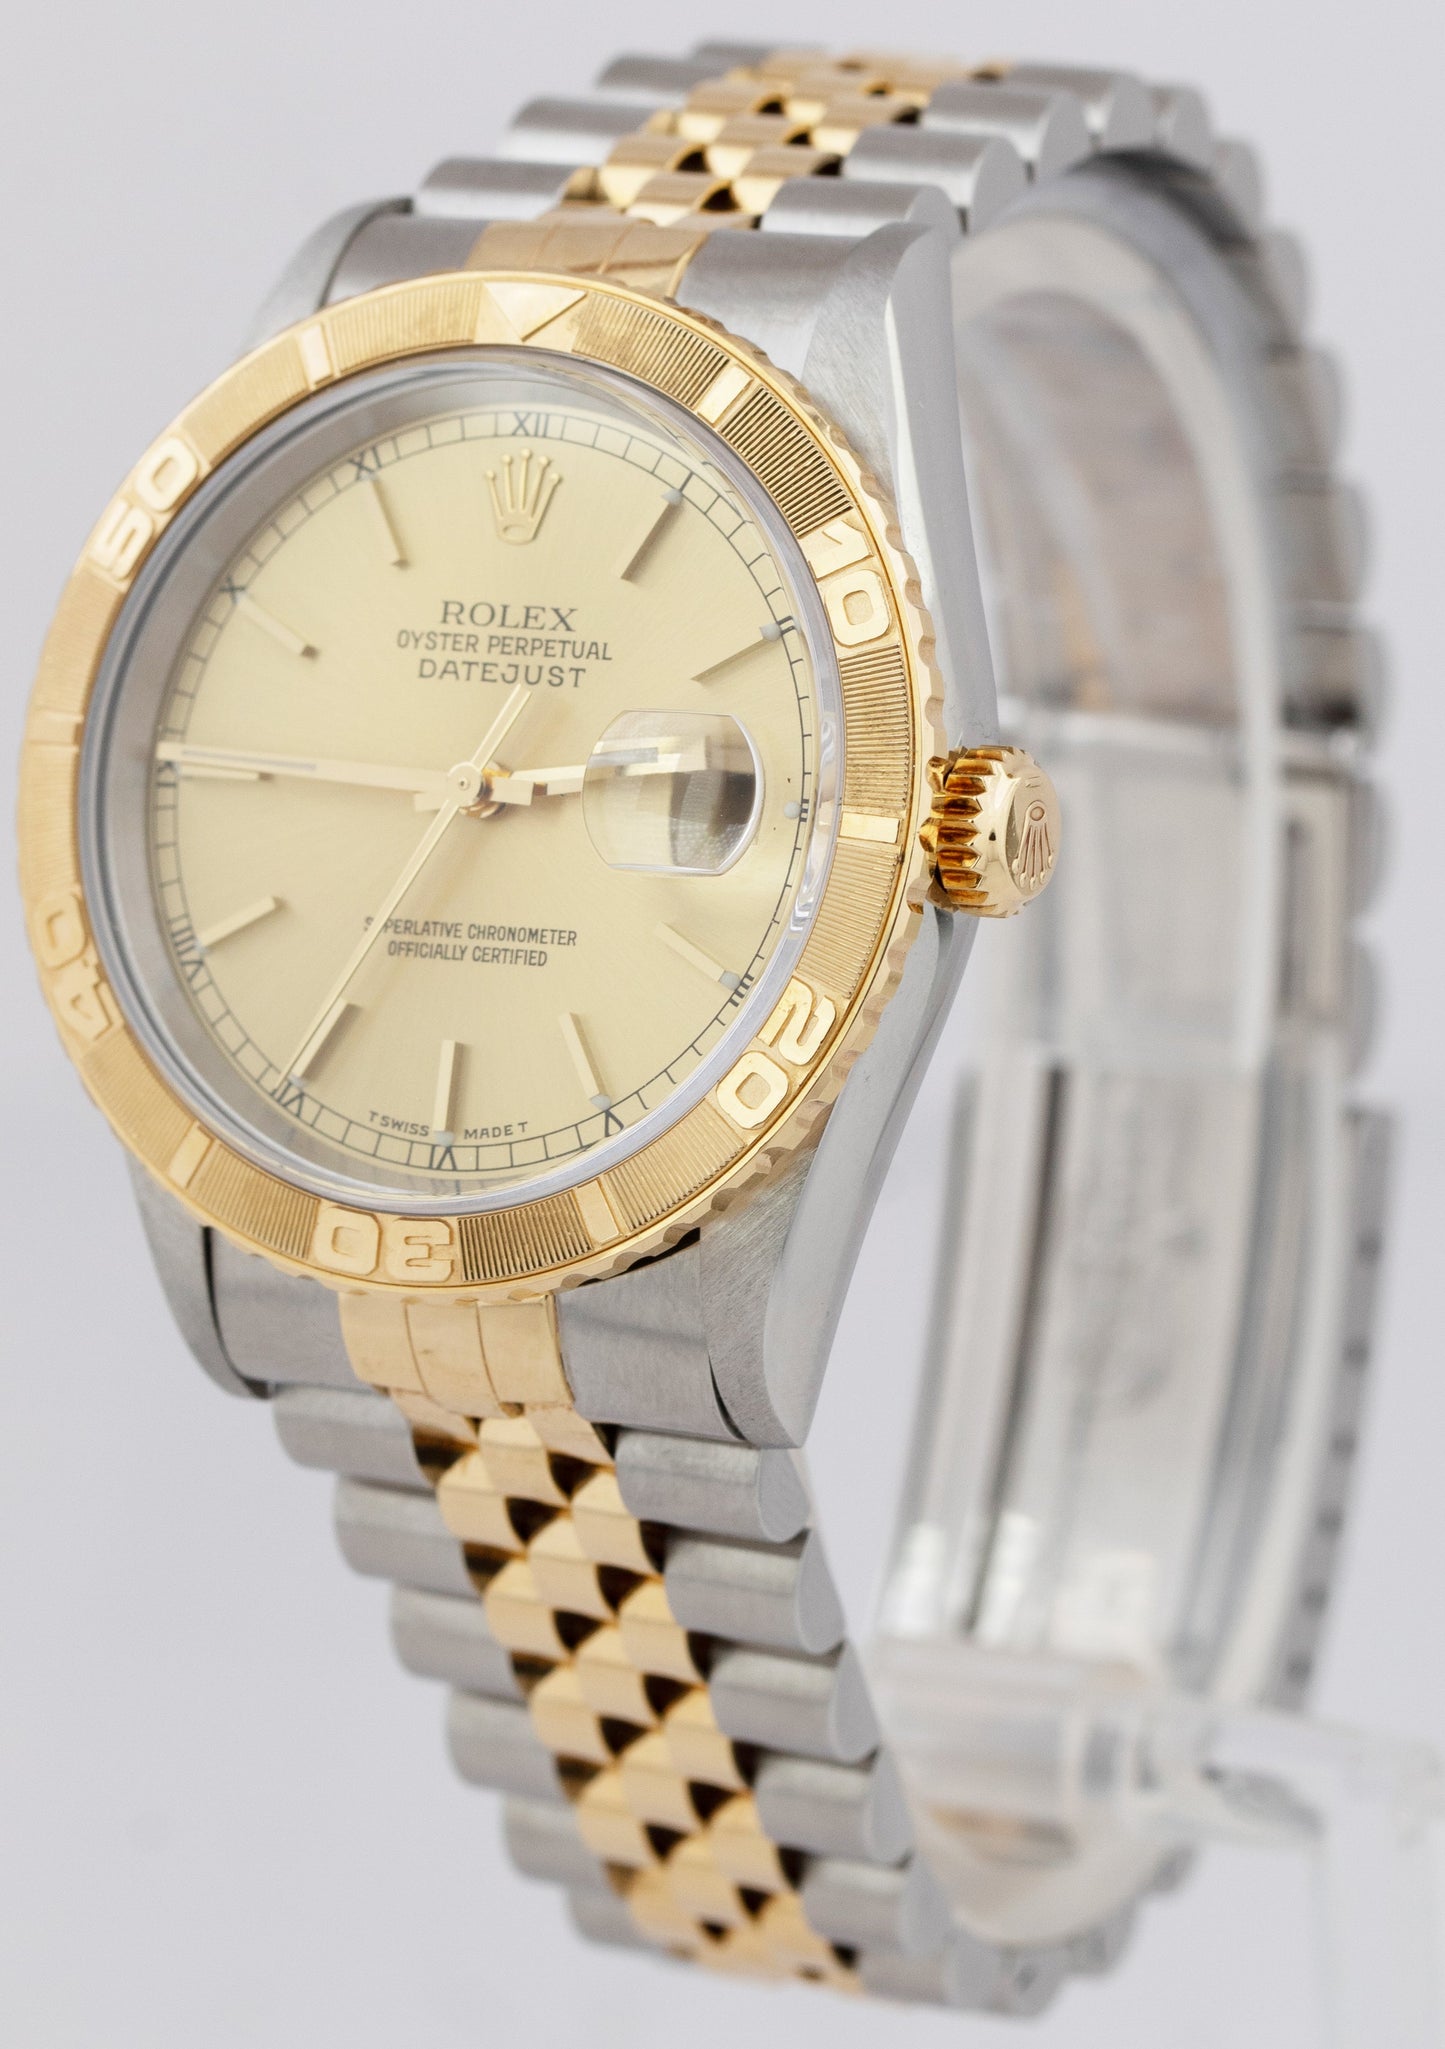 Rolex DateJust 16263 Turn-O-Graph 36mm Champagne Thunderbird Two-Tone Gold Watch